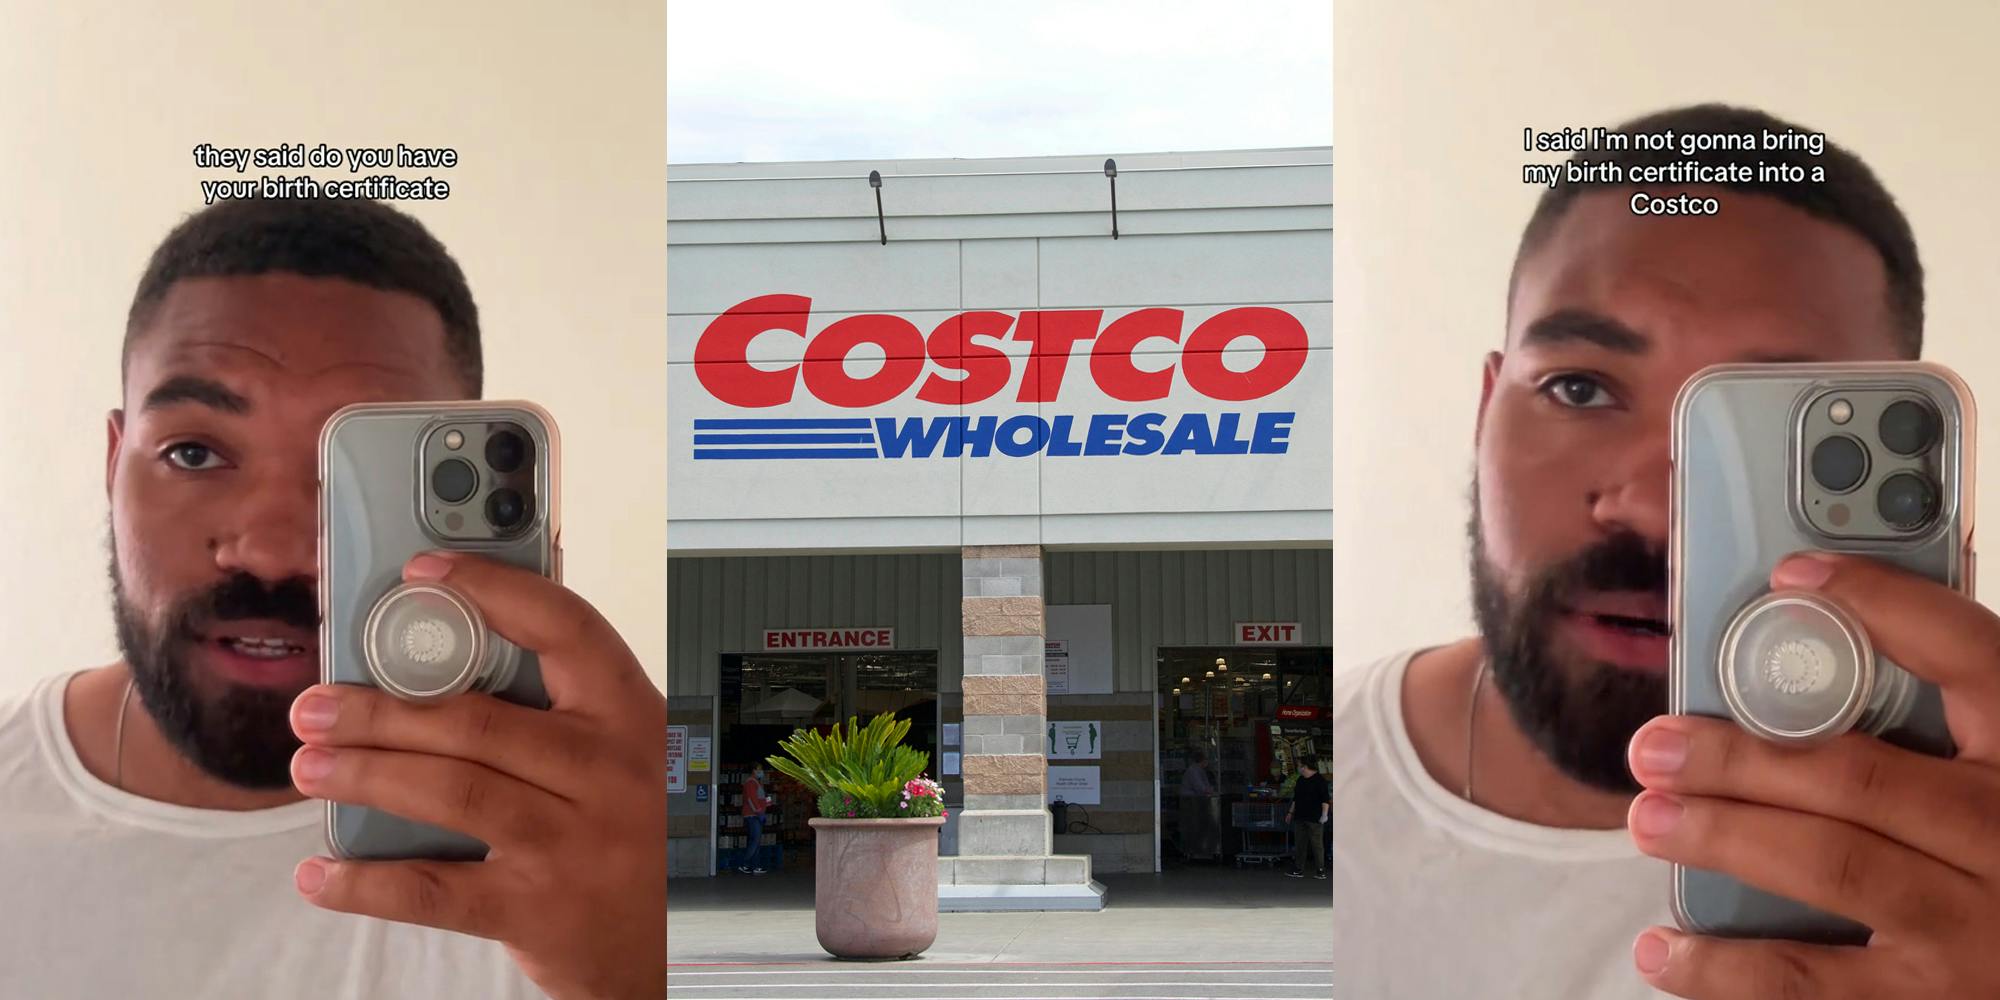 Costco customer speaking "they said do you have your birth certificate" (l) Costco building with sign (c) Costco customer speaking with caption "I said I'm not gonna bring my birth certificate into a Costco" (r)